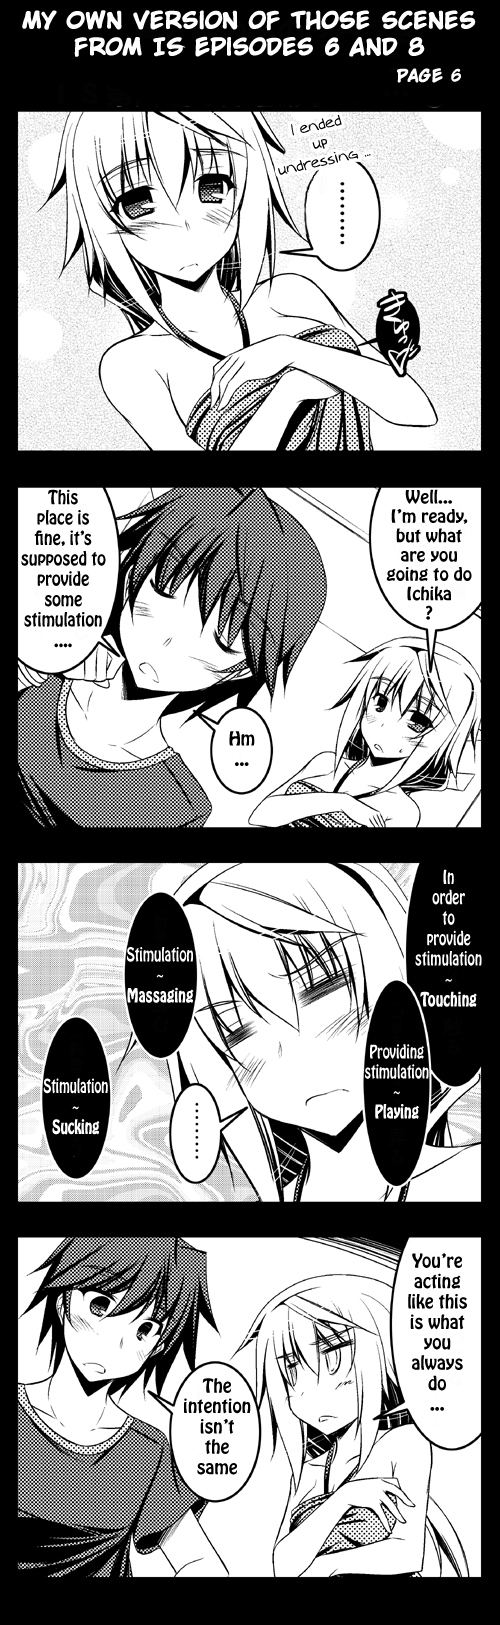 Infinite Stratos If Only ... (Doujinshi) Ch. 2 My own version of that scene in IS episode 6 & 8